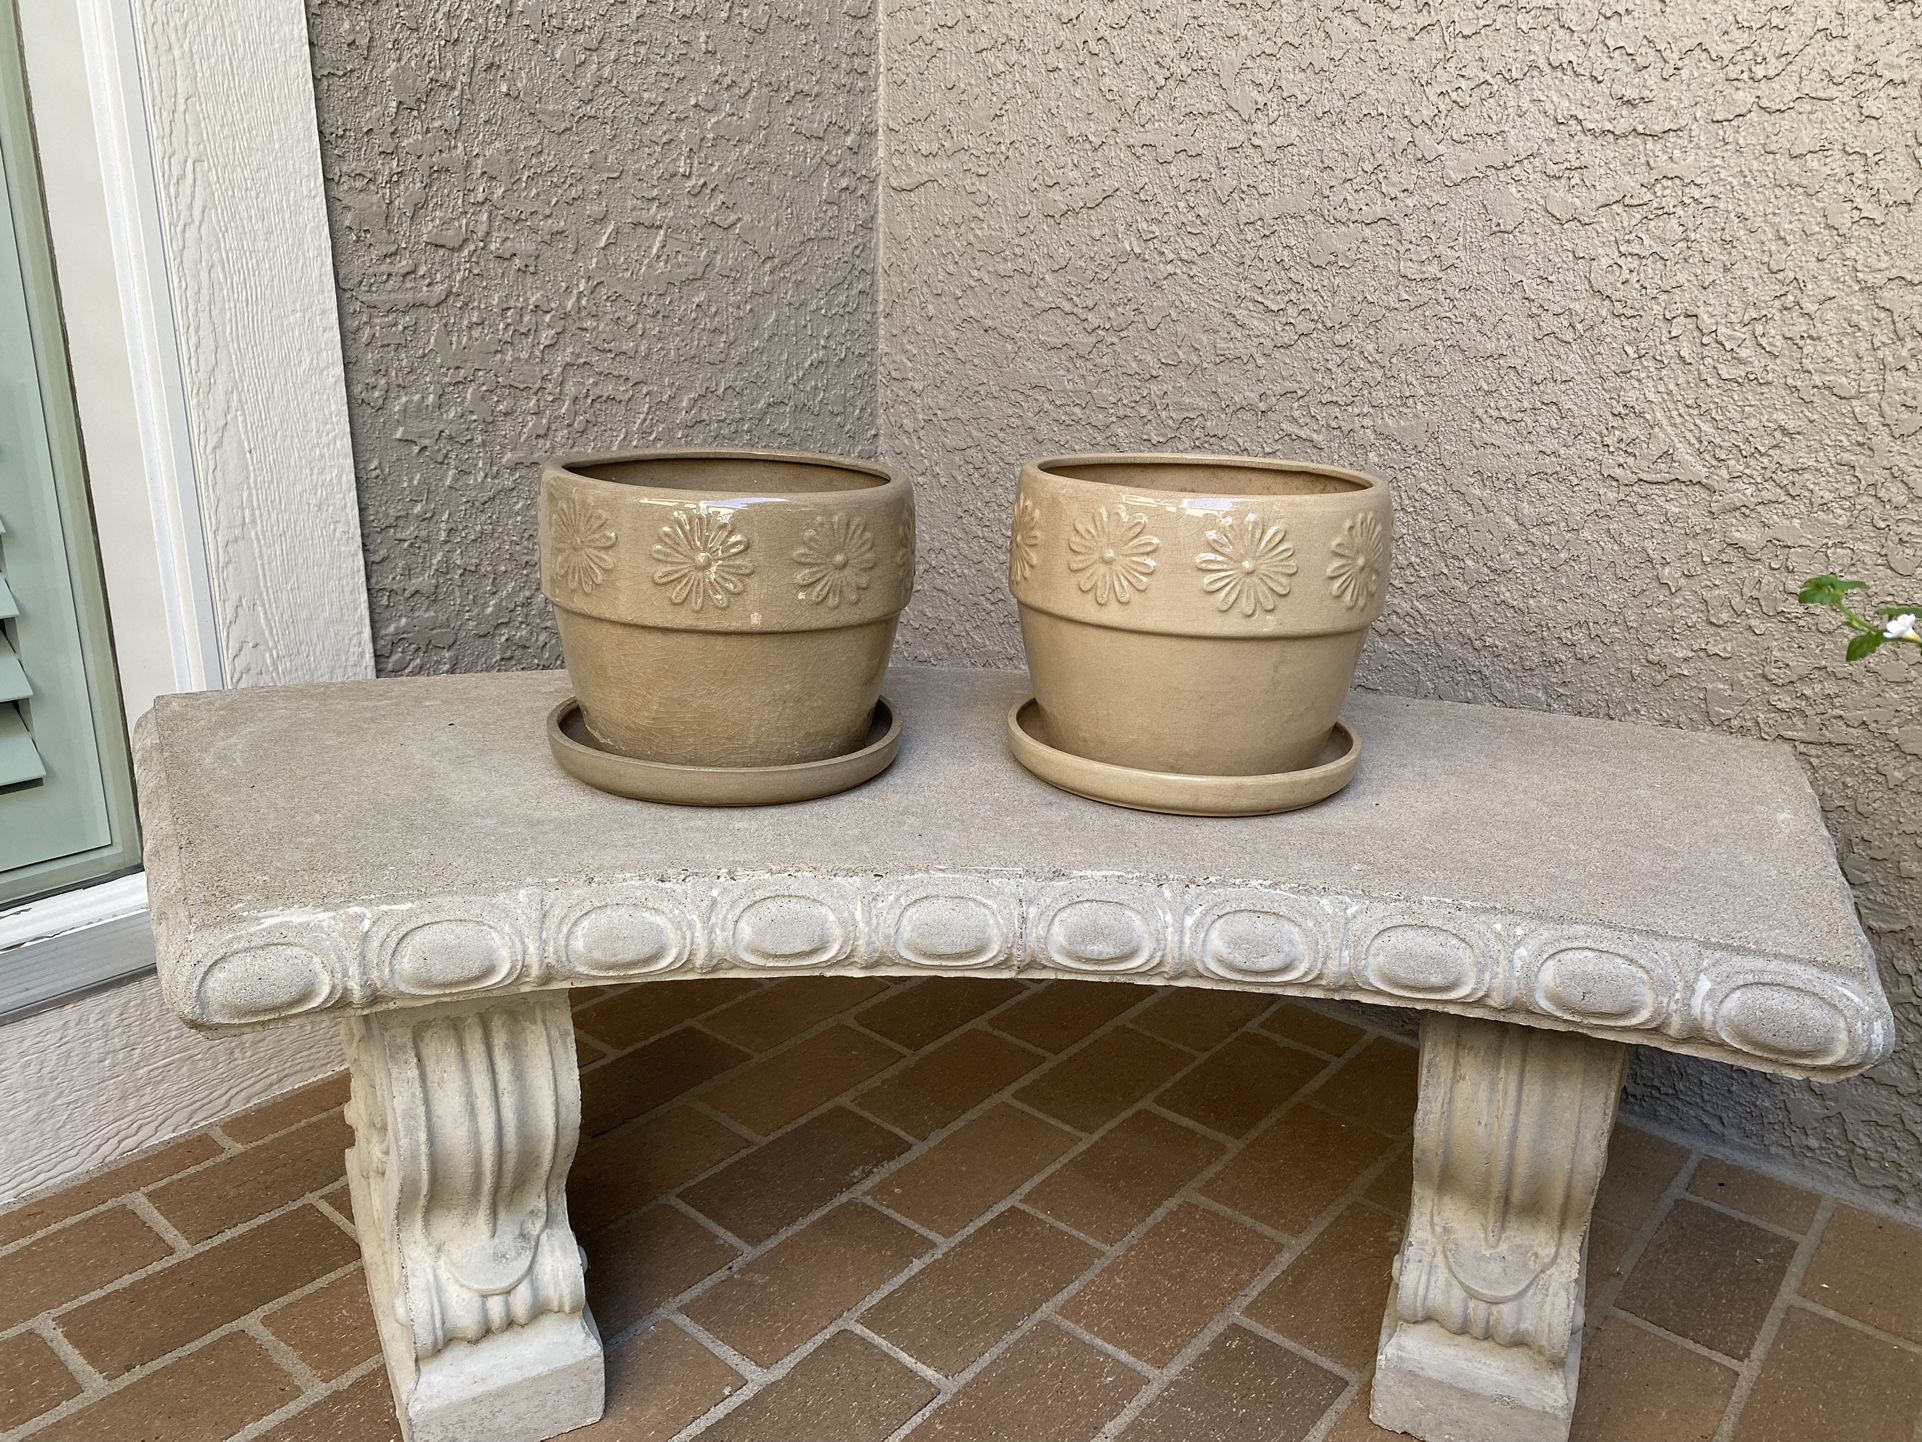 REDUCED TO SELL - 2 Ceramic Planter Pots - Indoor Or Outdoor 